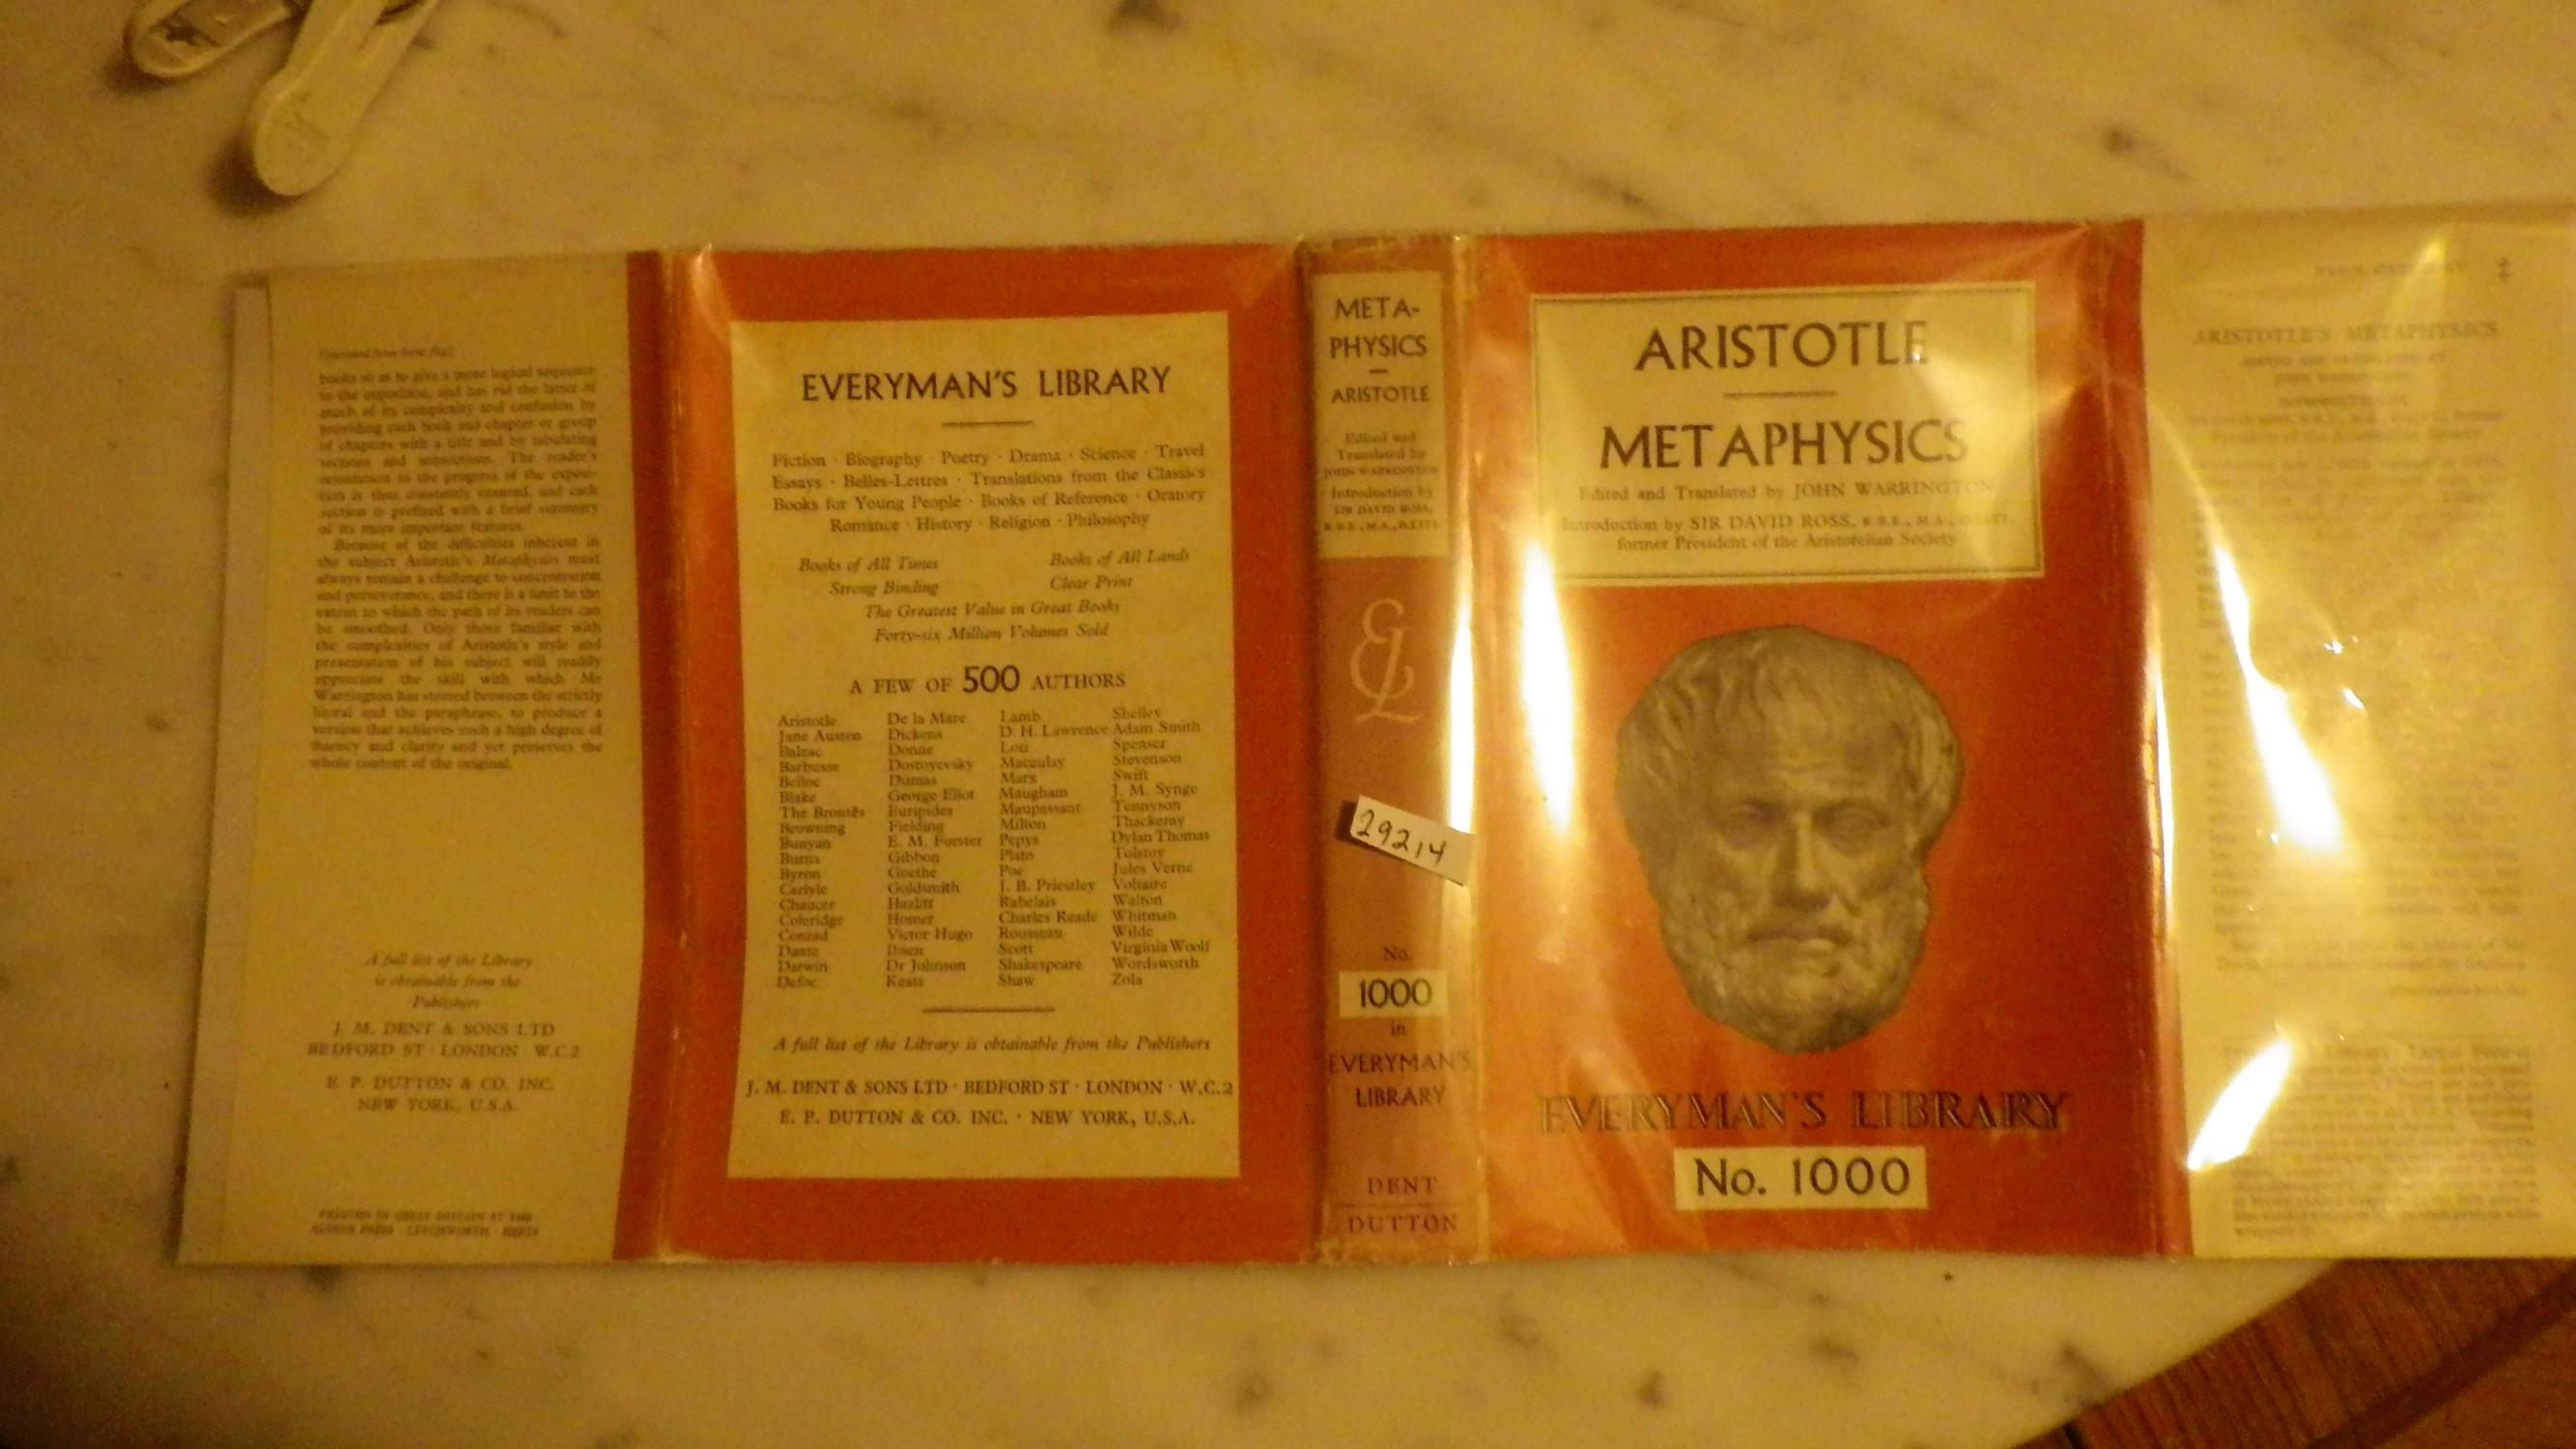 METAPHYSICS by ARISTOTLE , EVERYMAN's Library#1000 in Orange dustjacket WITH GENUINE PORTRAIT OF Him , LARGER FORMAT,GREEK PHILOSOPHER Taught by Plato, writings cover many subjects. including physics, - ARISTOTLE , Born 384 B.C. GREECE, Tutor to Alexander the Great of Macedonia,, Edited & Translated by John Warrington, Introd by Sir David Ross, Orange & White Decorated Endpapers, Price Catagory Front DJ Flap